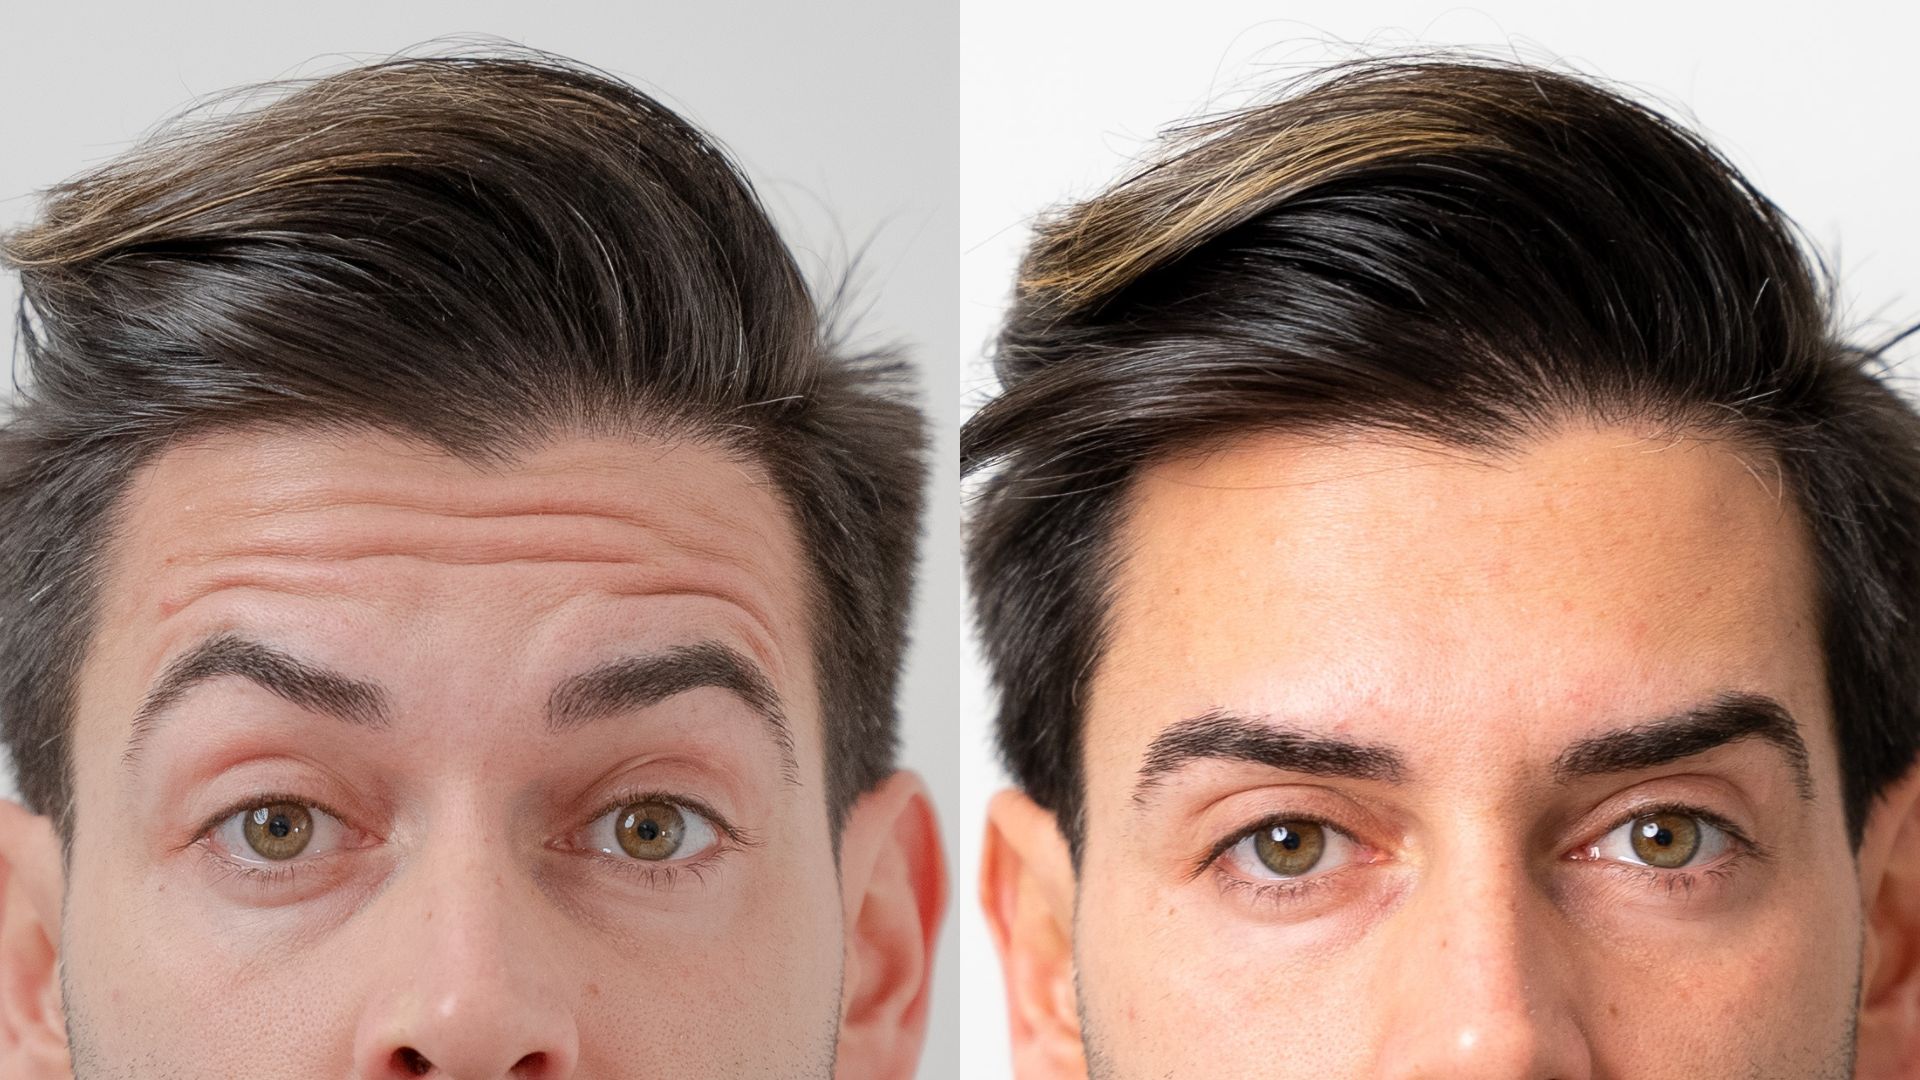 https://contourclinics.com.au/wp-content/uploads/Anti-Wrinkle-Injections-Before-And-After.jpg